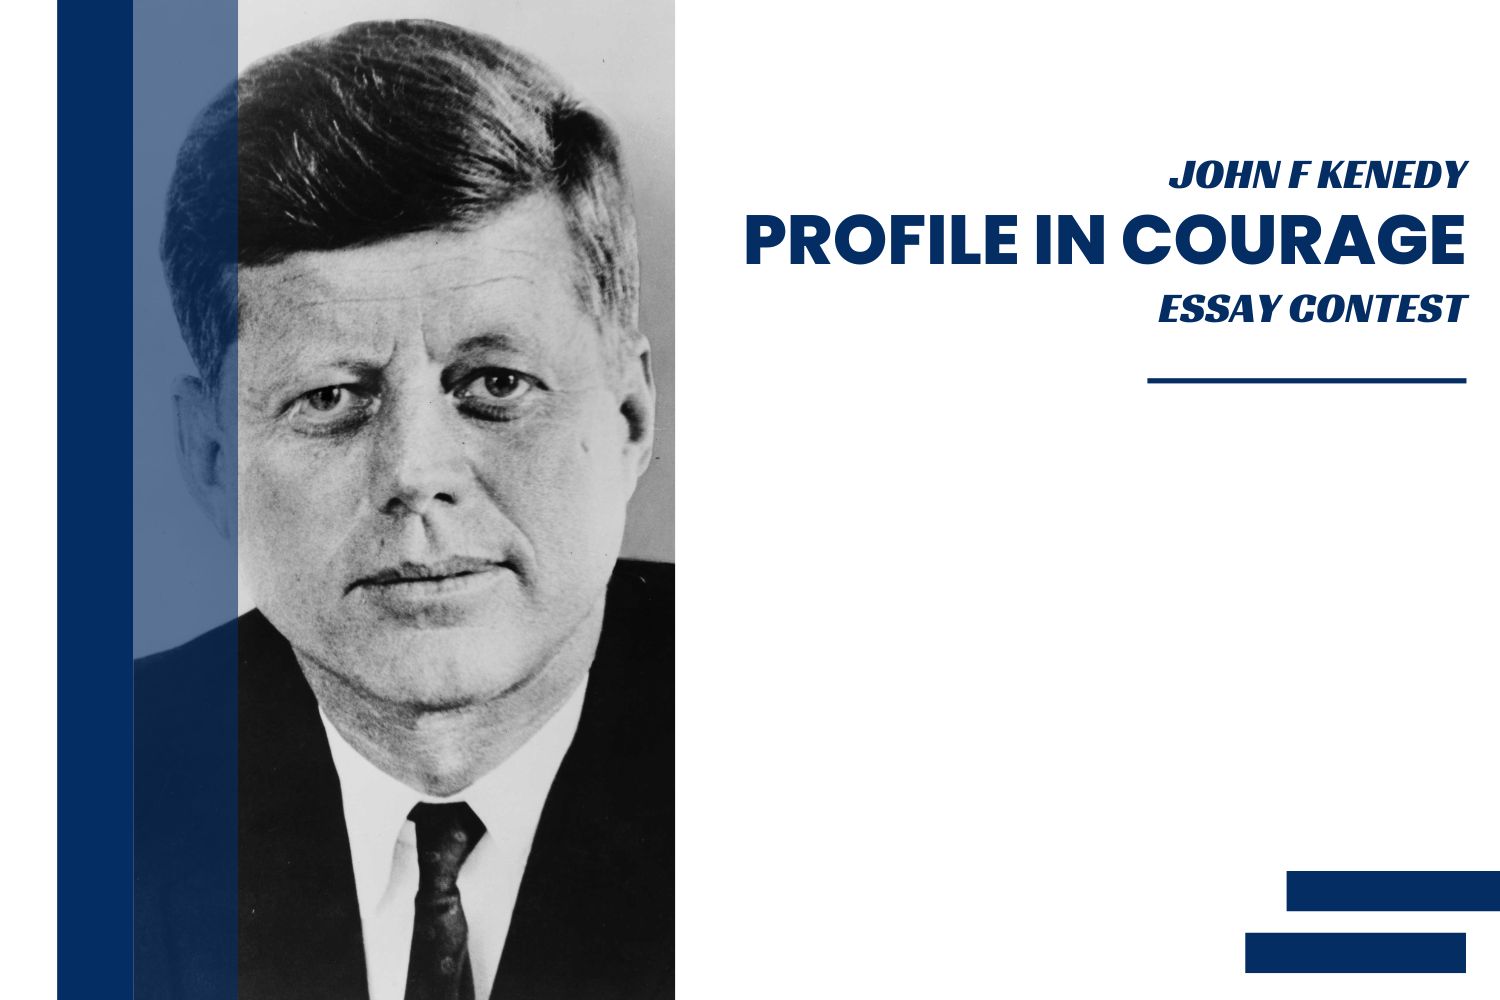 jfk library profile in courage essay contest